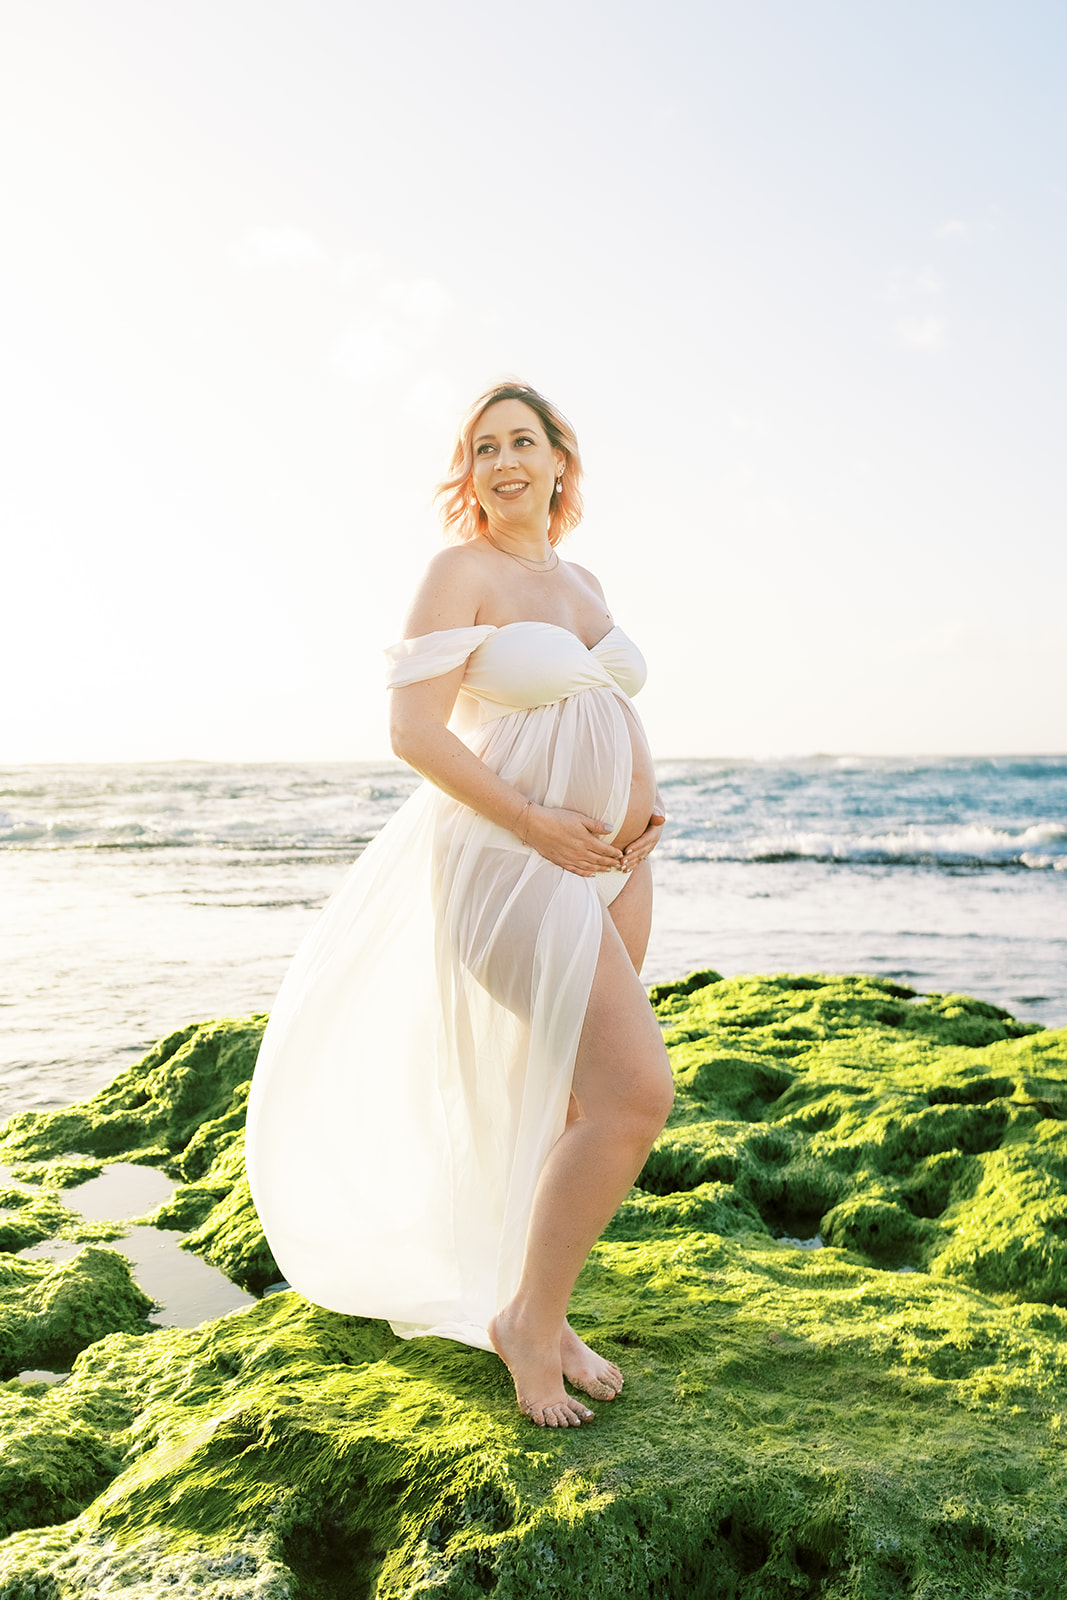 A pregnant woman in a white dress holding her baby bump on a beach with waves in the background Maternity session